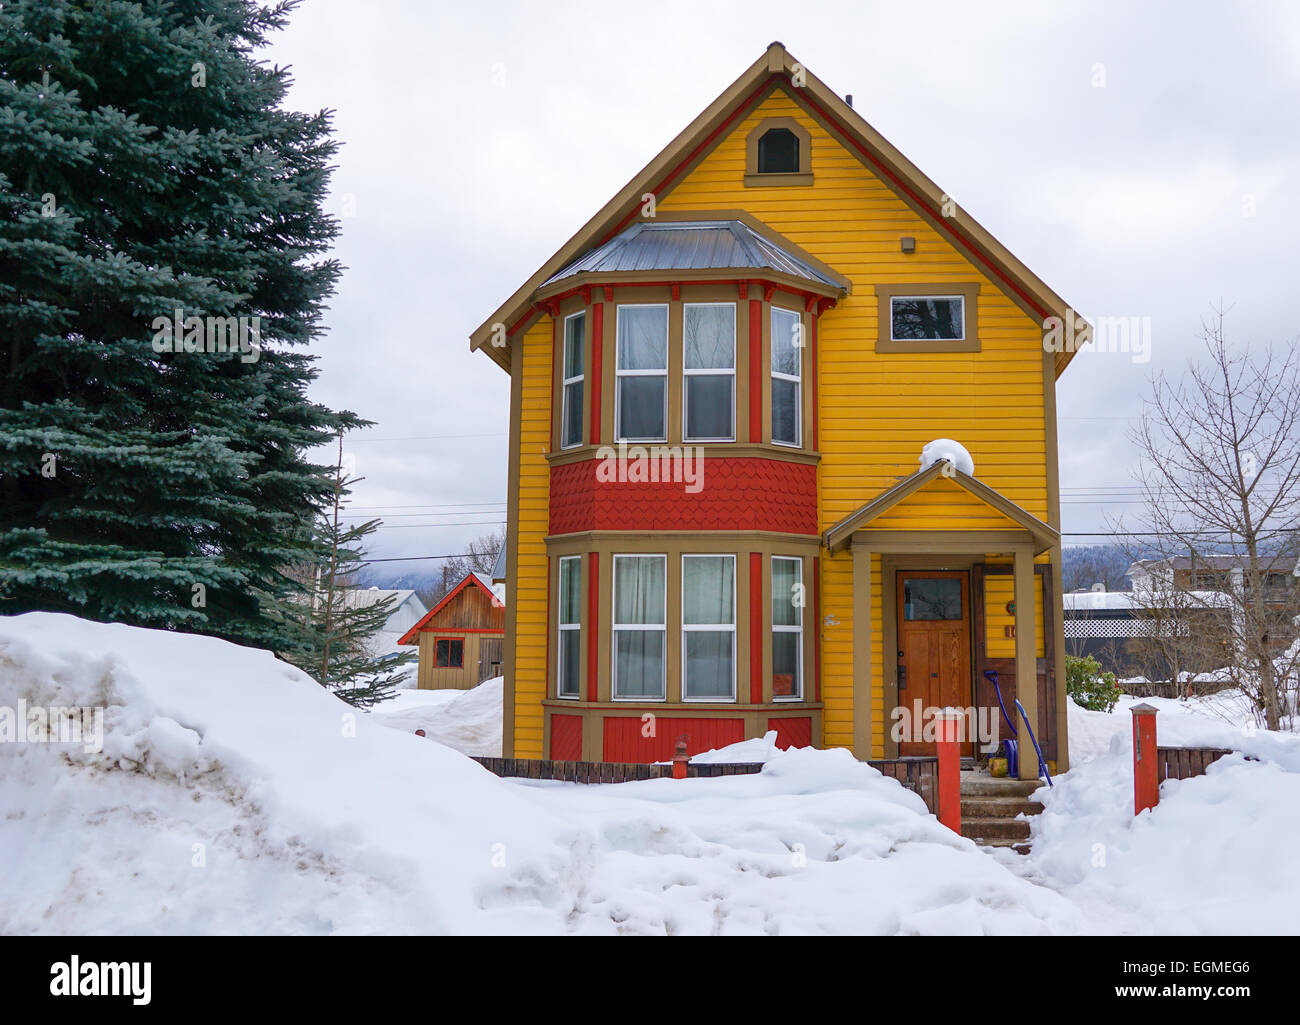 Colorful house in the snow, Revelstoke, Canada. Stock Photo